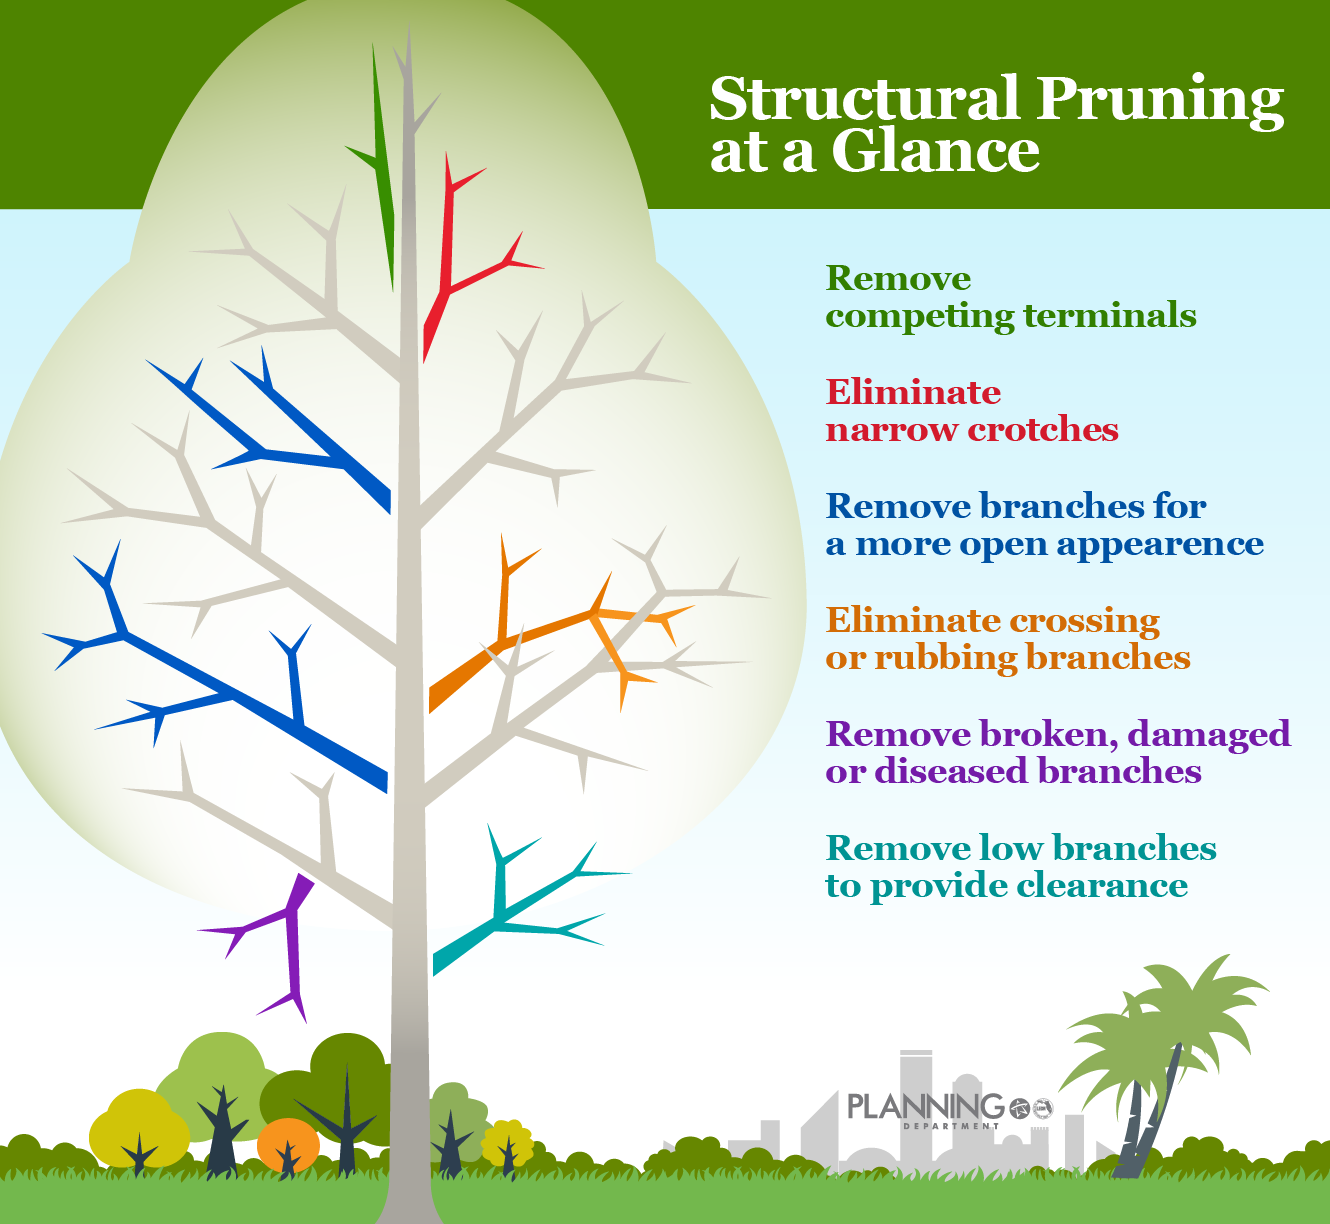 Use this graphic as an at-a-glance guide to help  you as you begin structural pruning. 